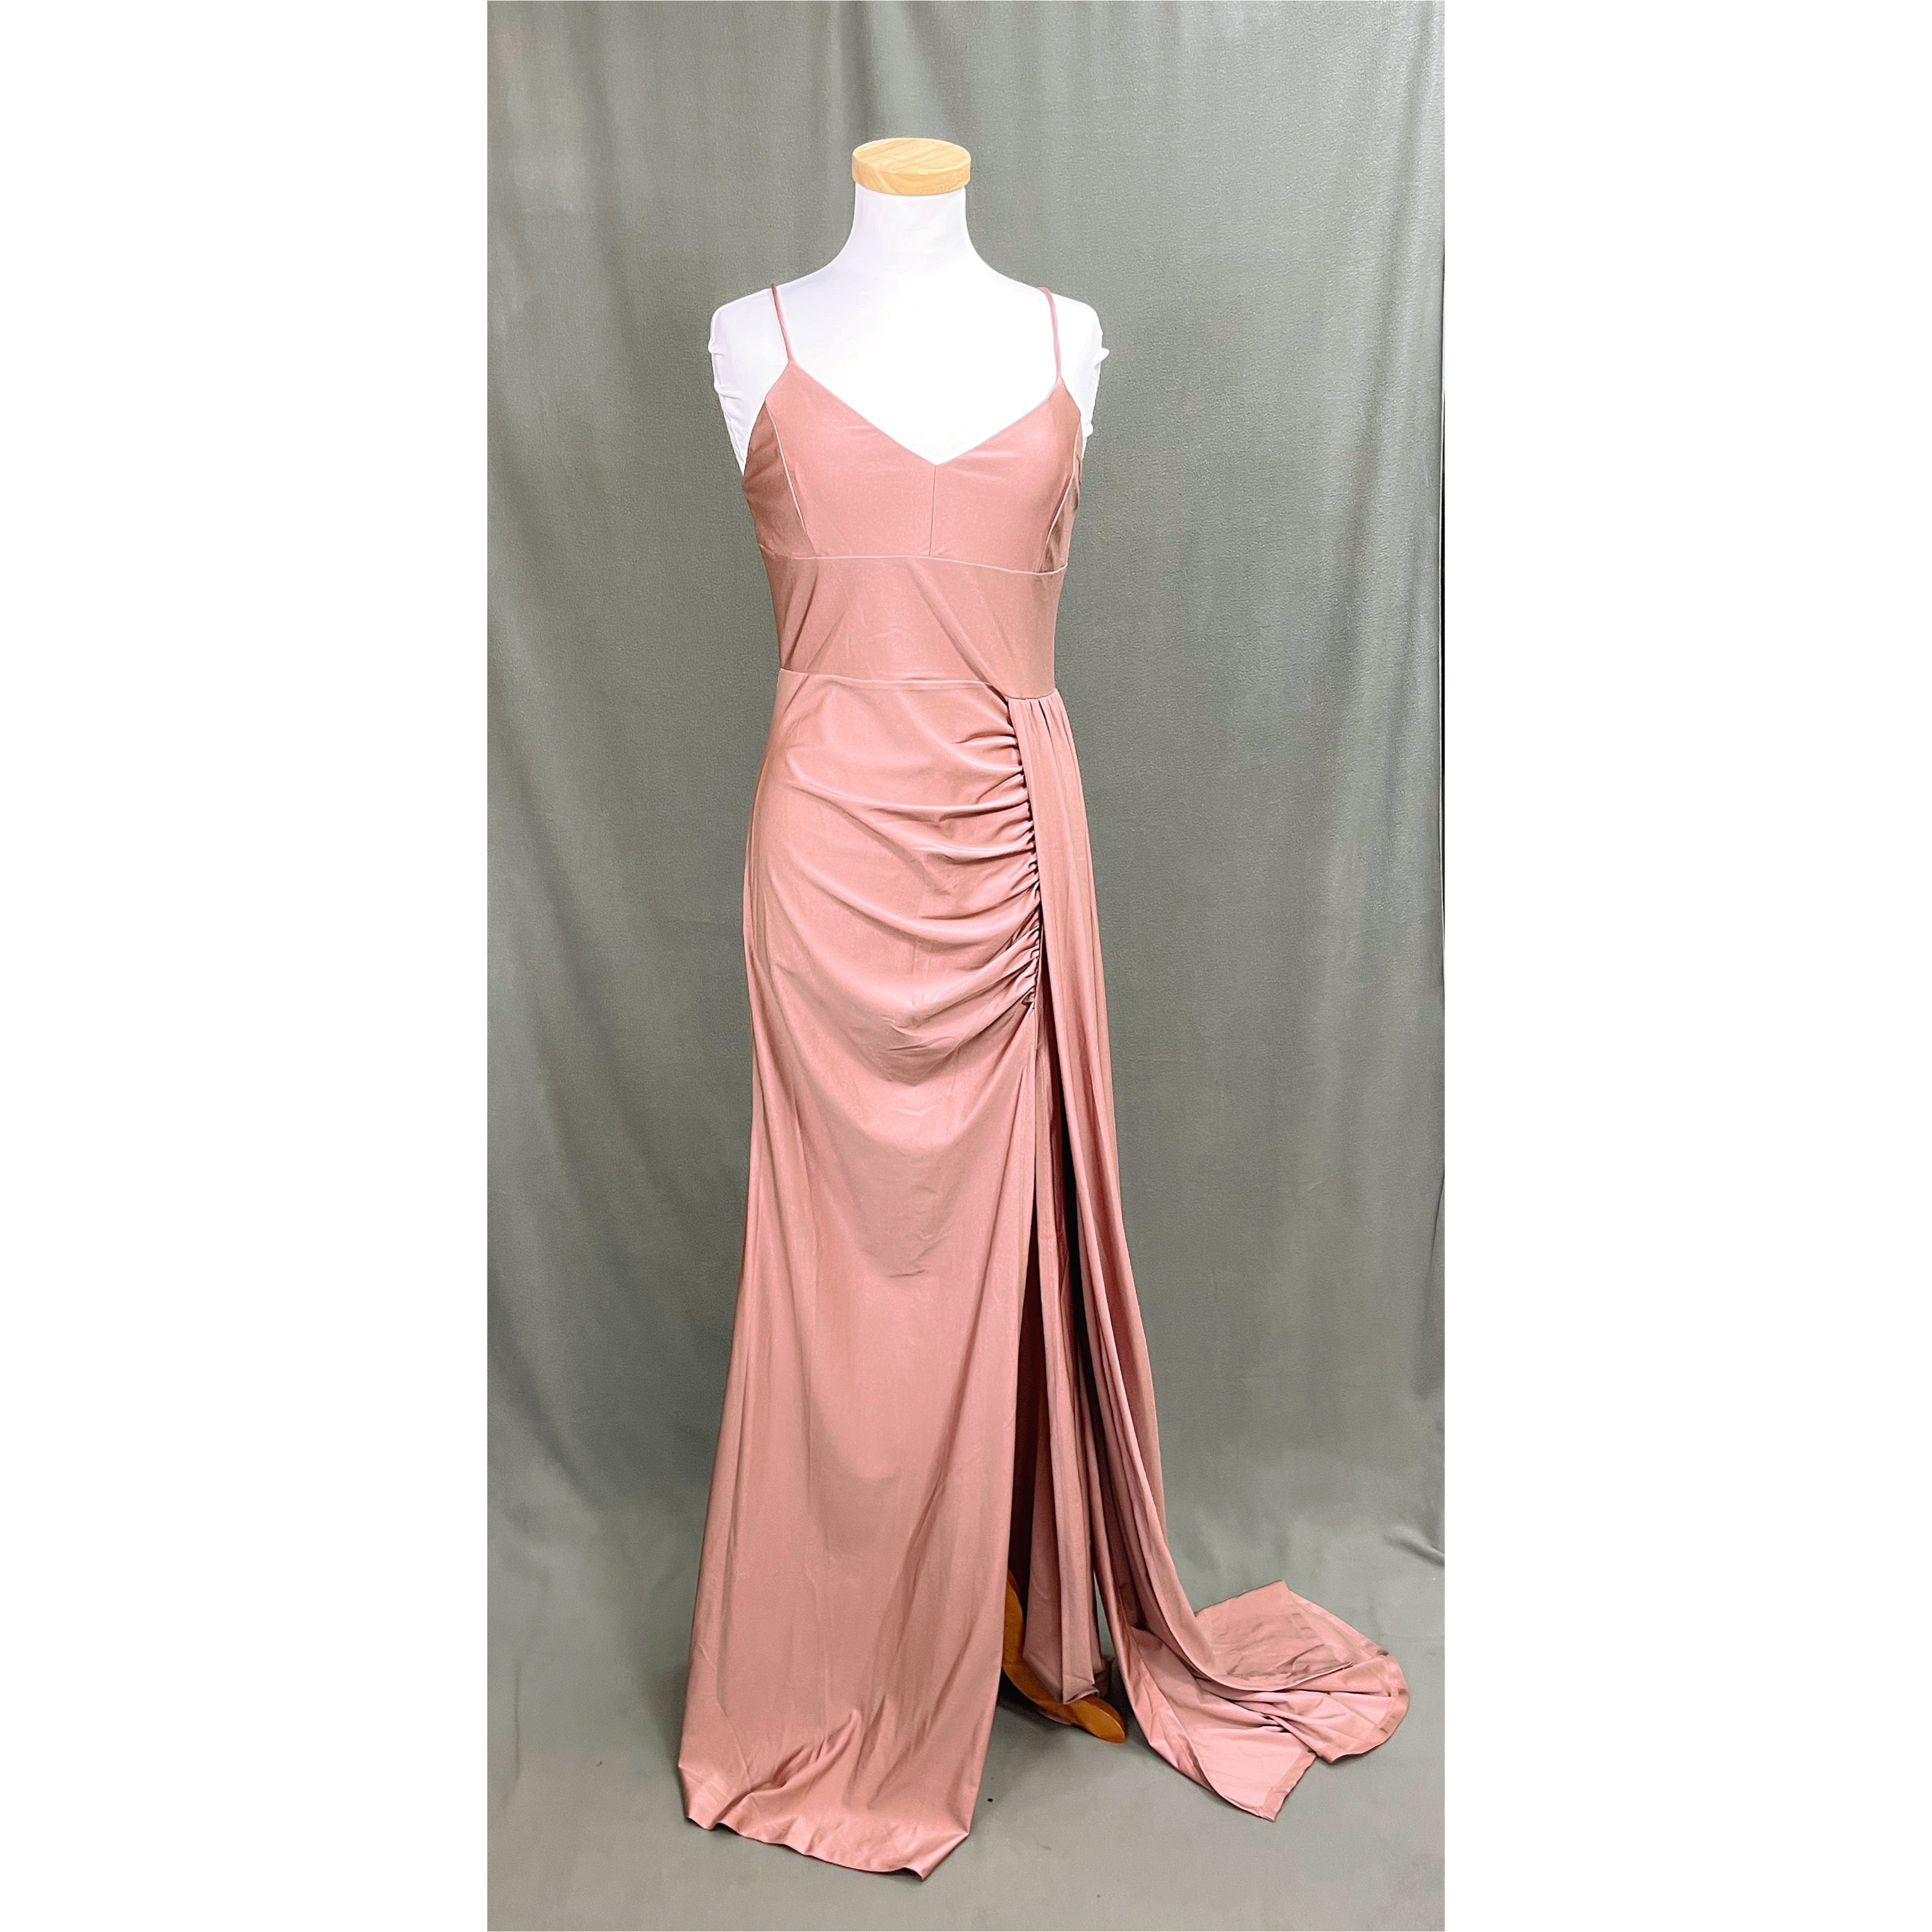 Cefian blush dress with train, size M. NEW WITH TAGS!